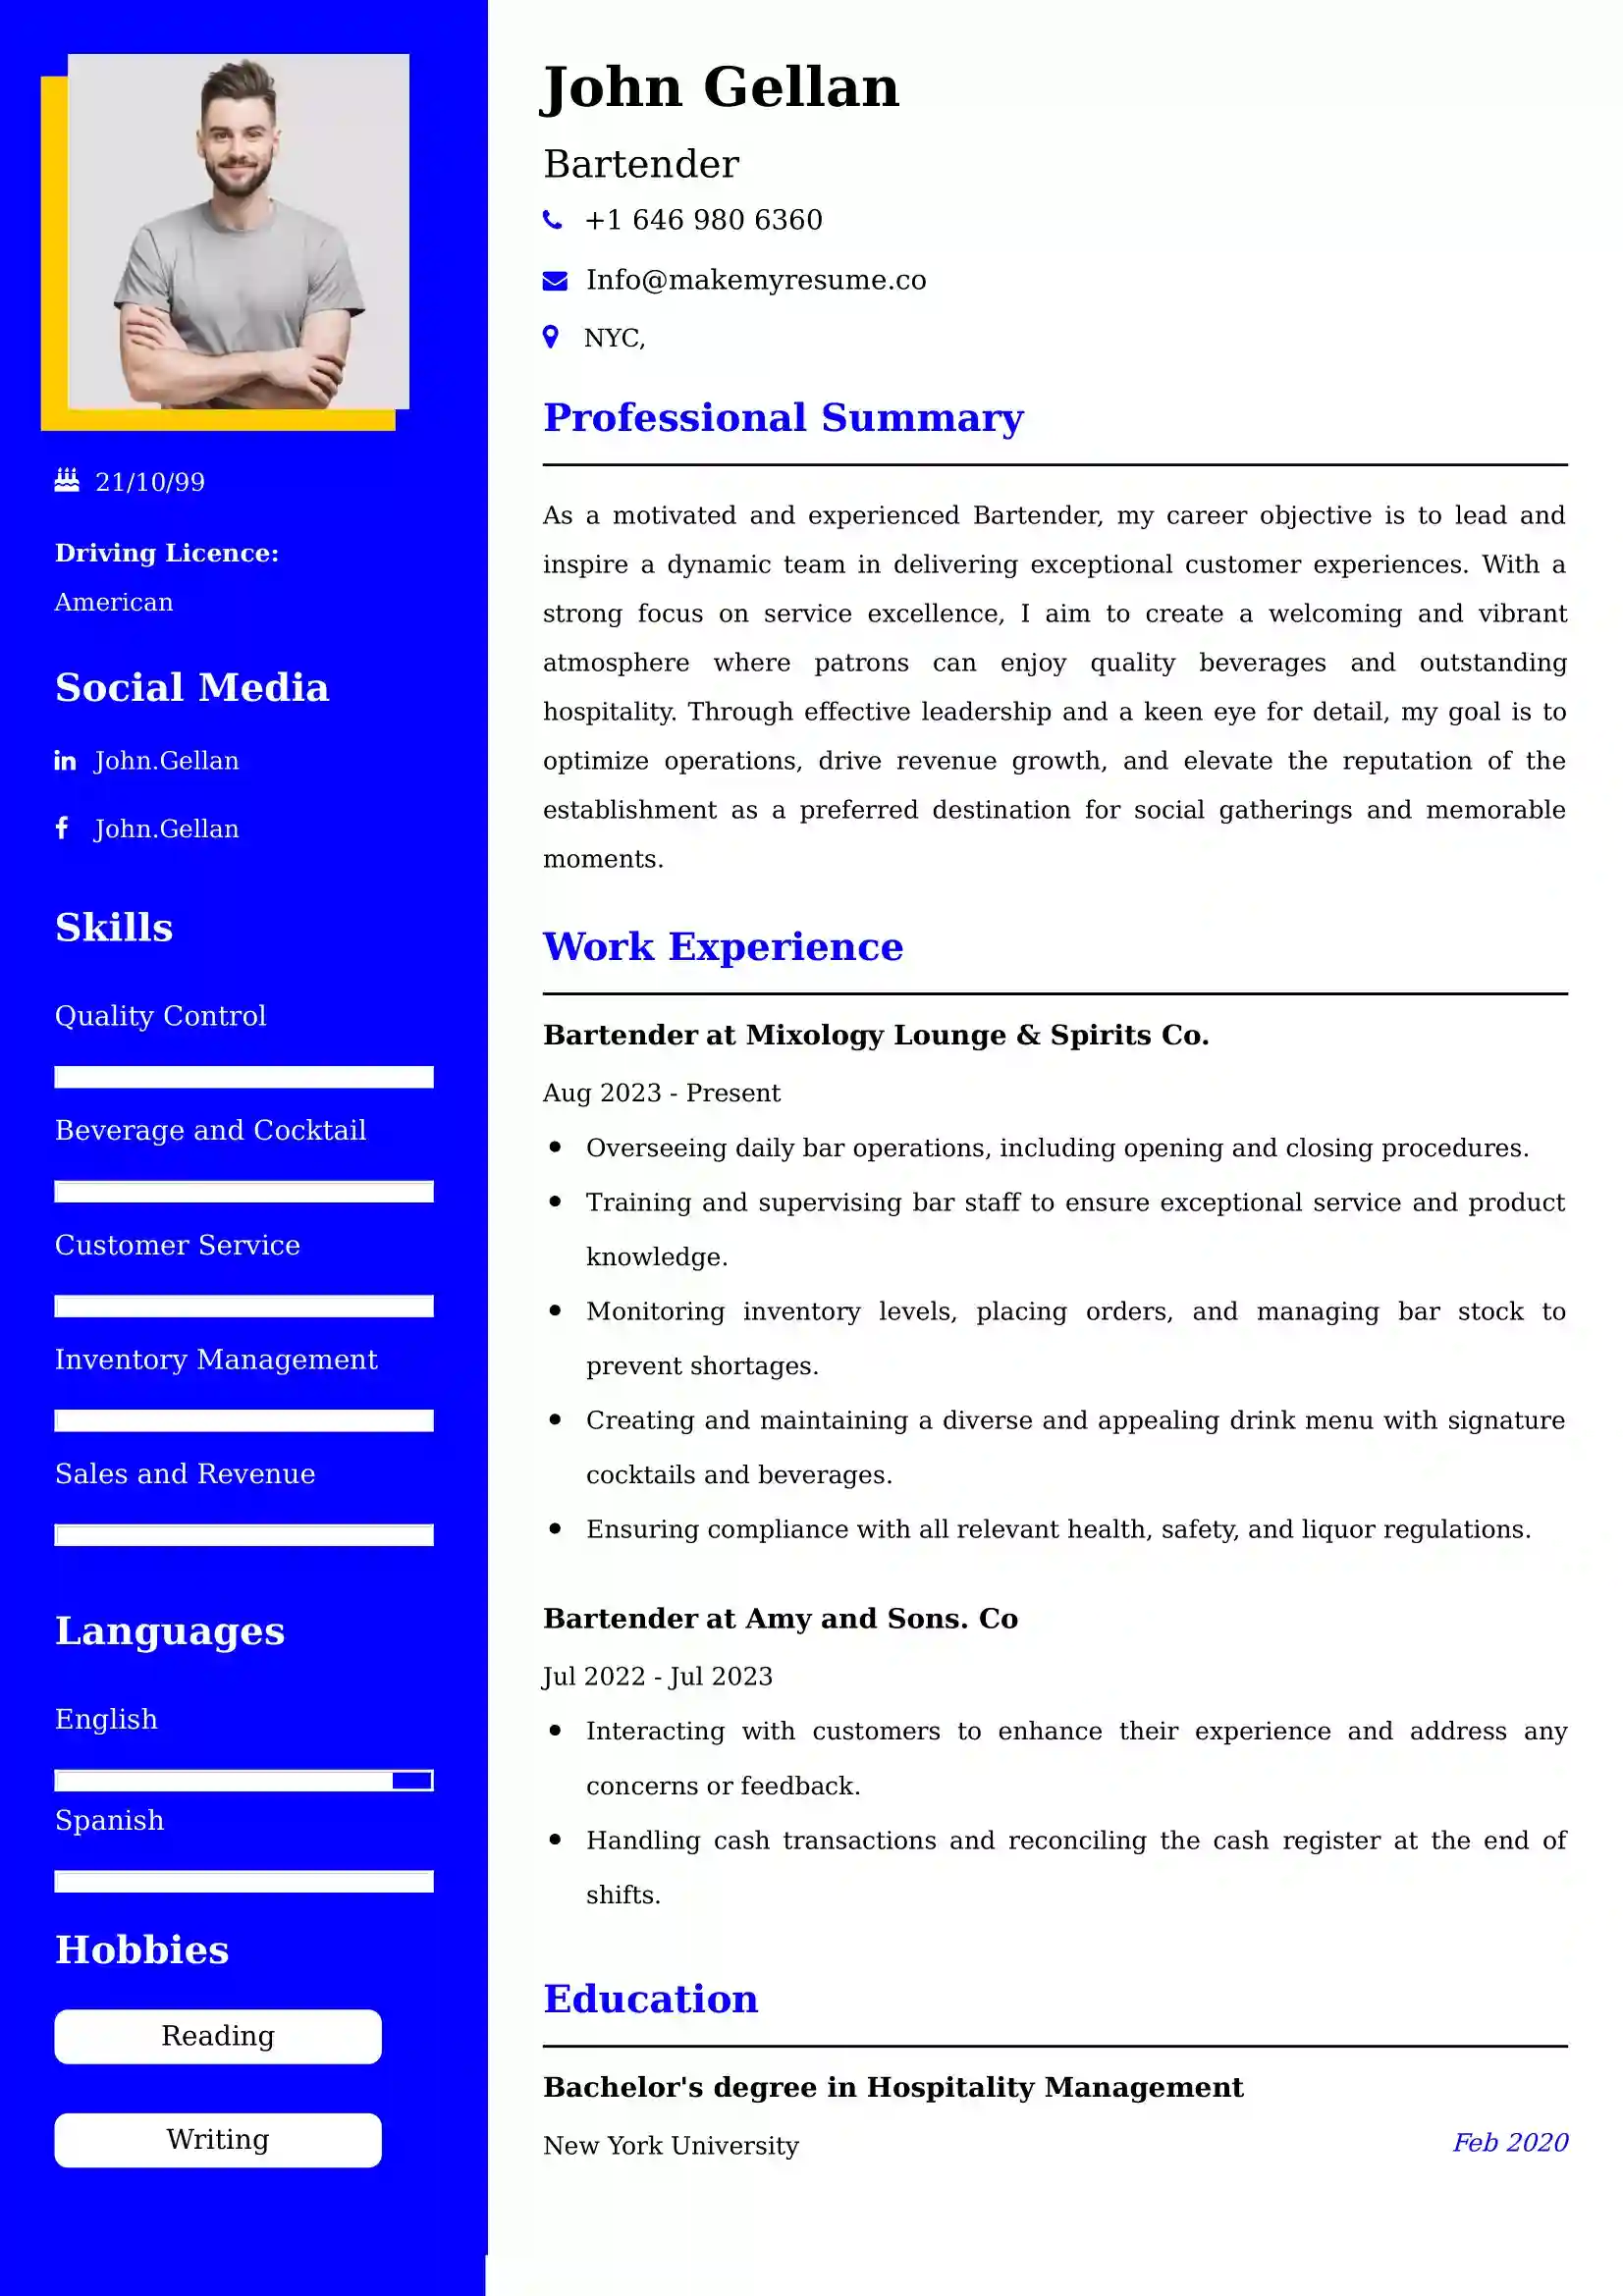 Bartender Resume Examples for UK Jobs - Tips and Guide